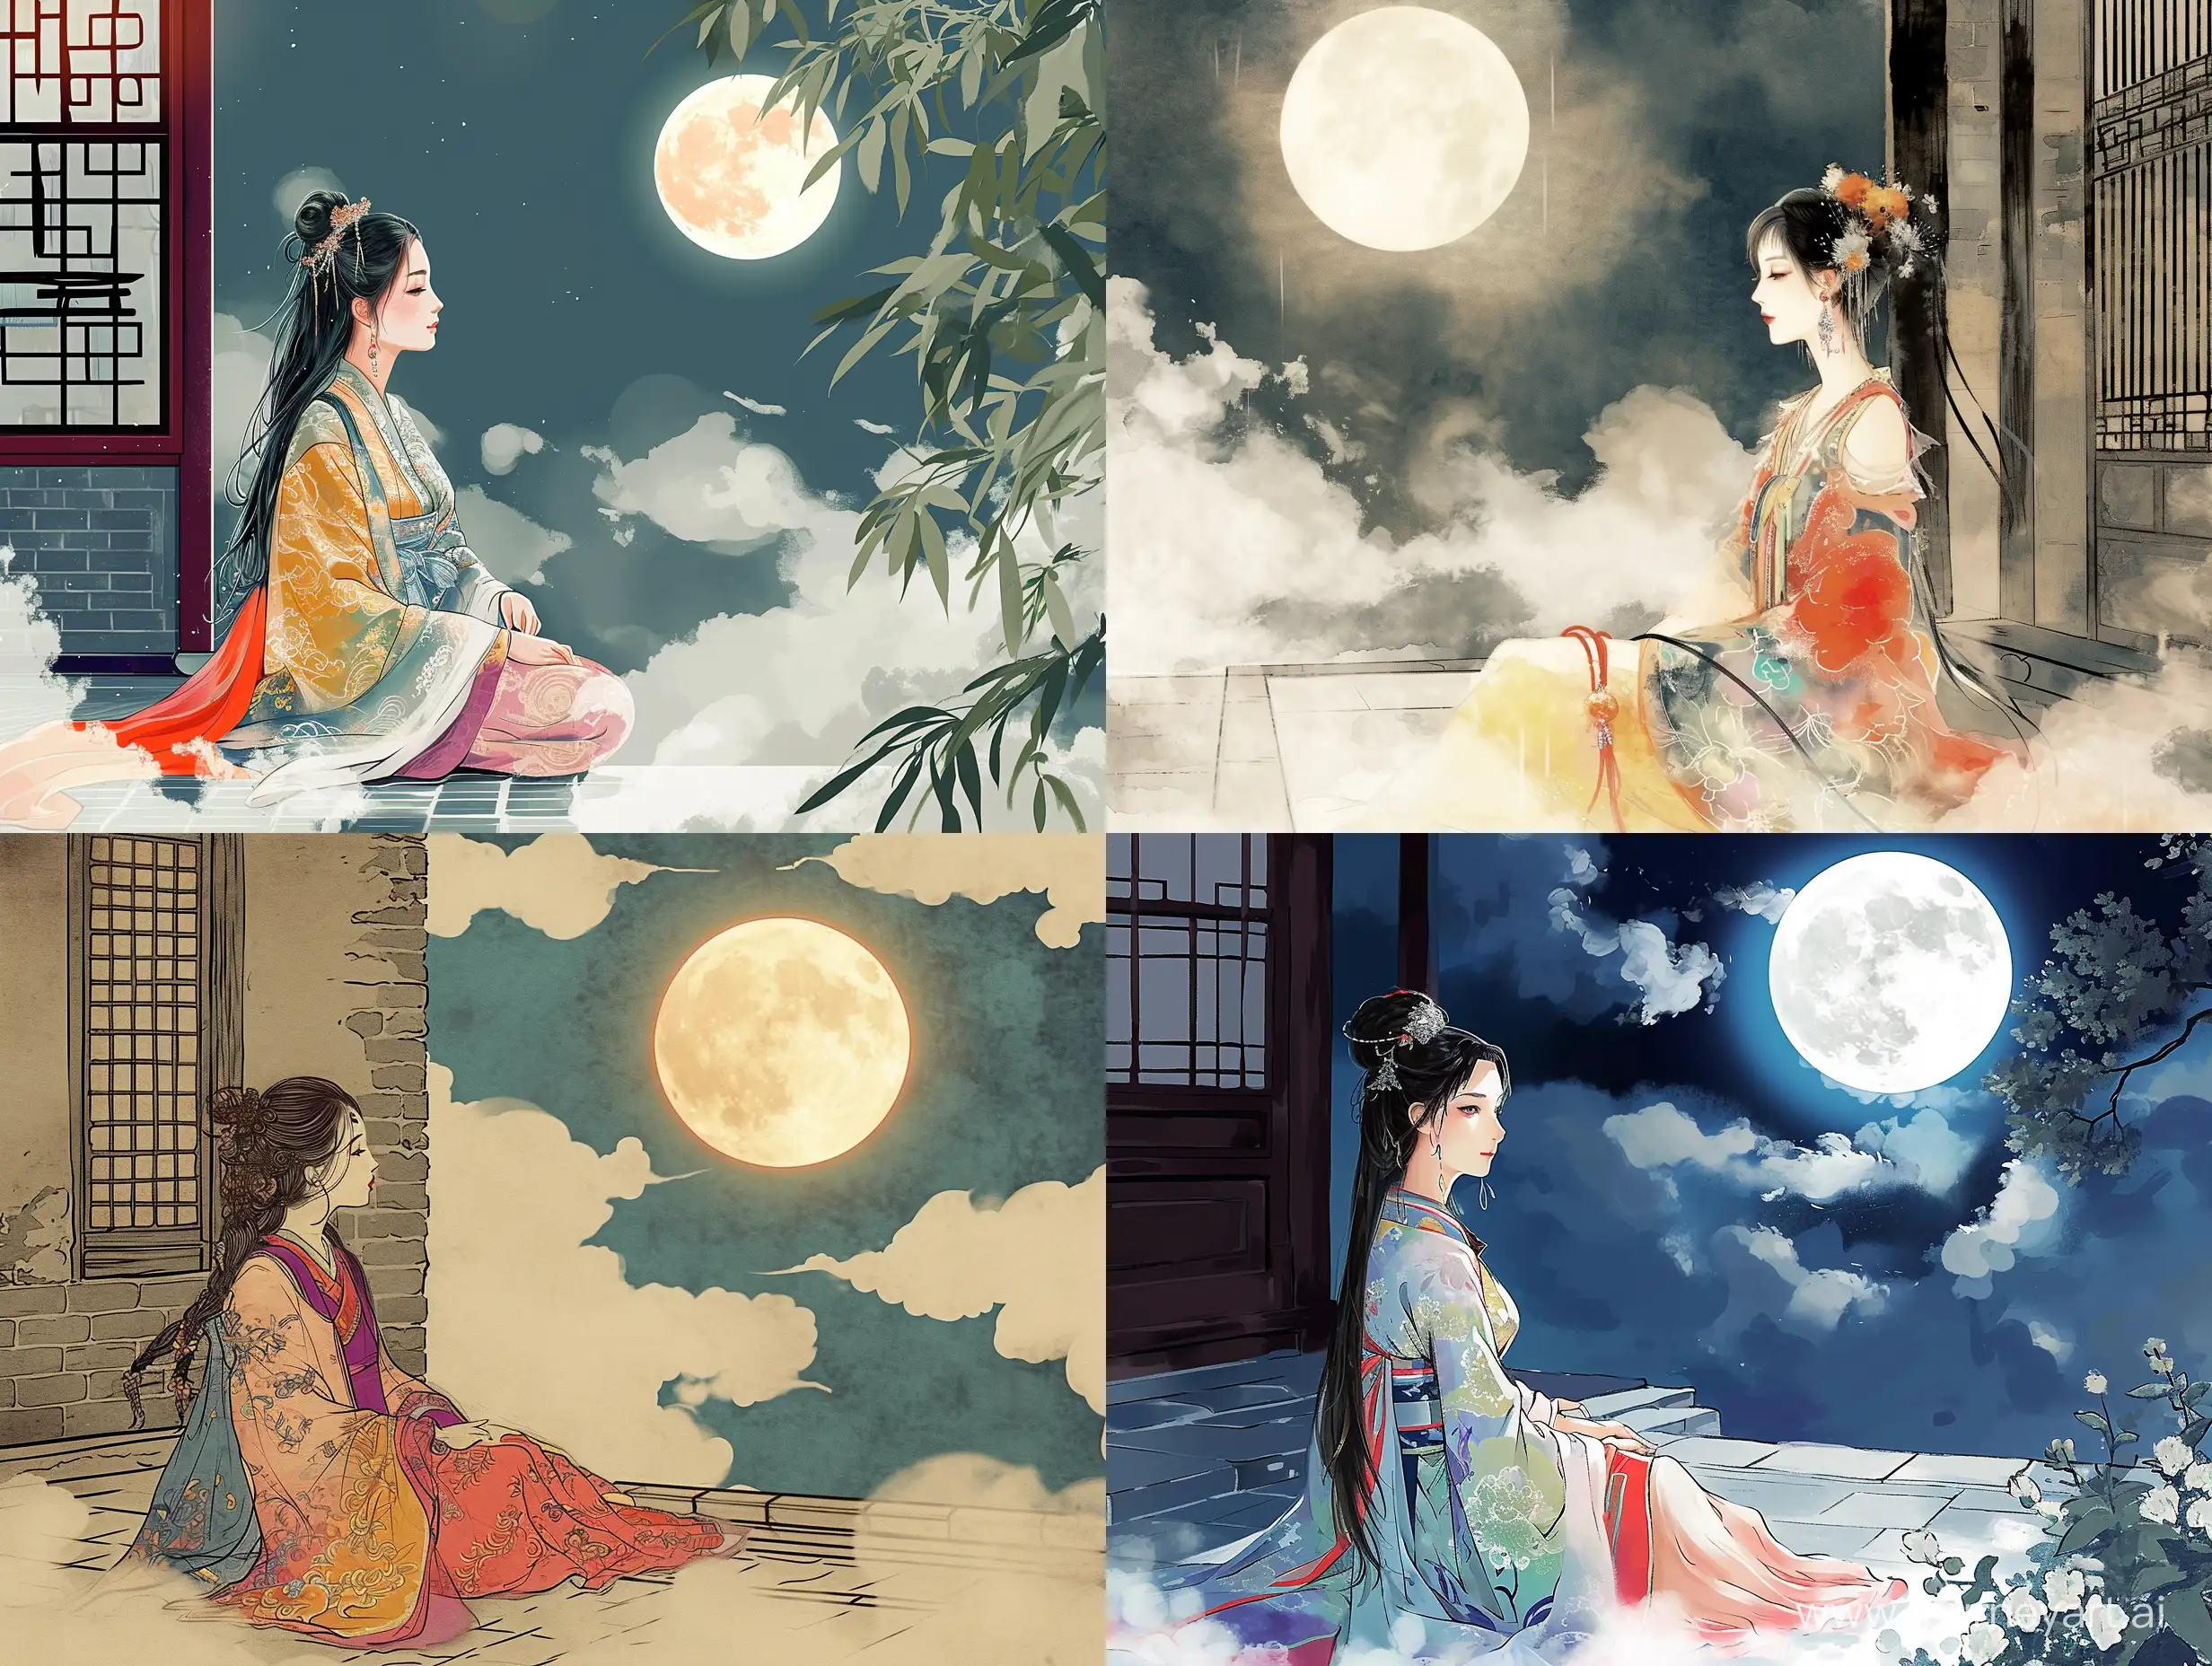 Elegant-Moonlit-Courtyard-Beautiful-Woman-in-Colorful-Chinese-Attire